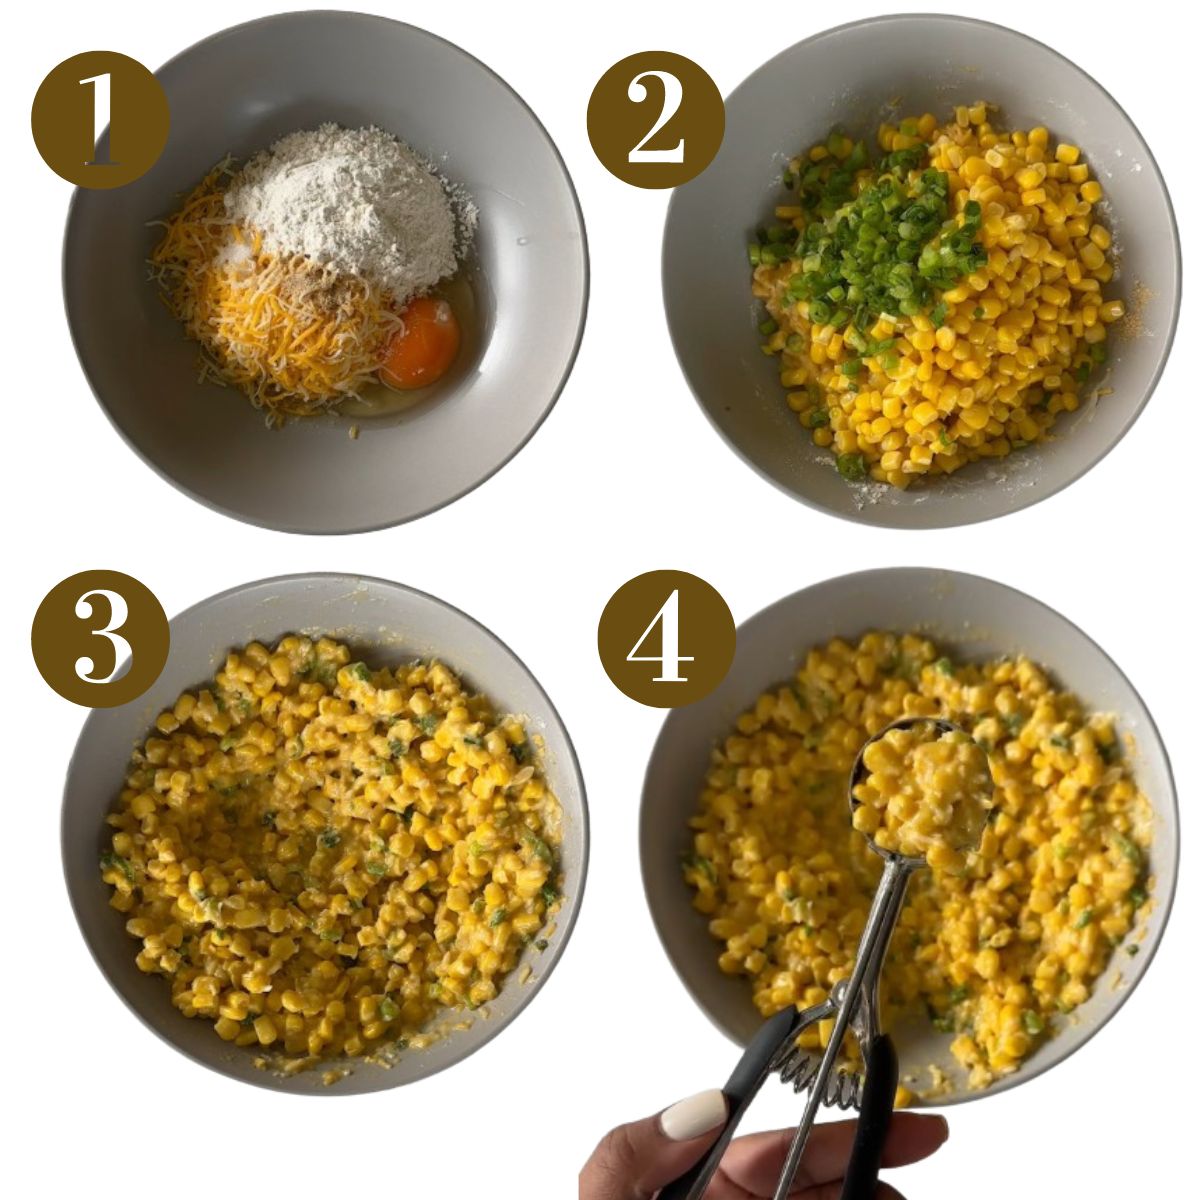 Steps to make sweet corn fritters.